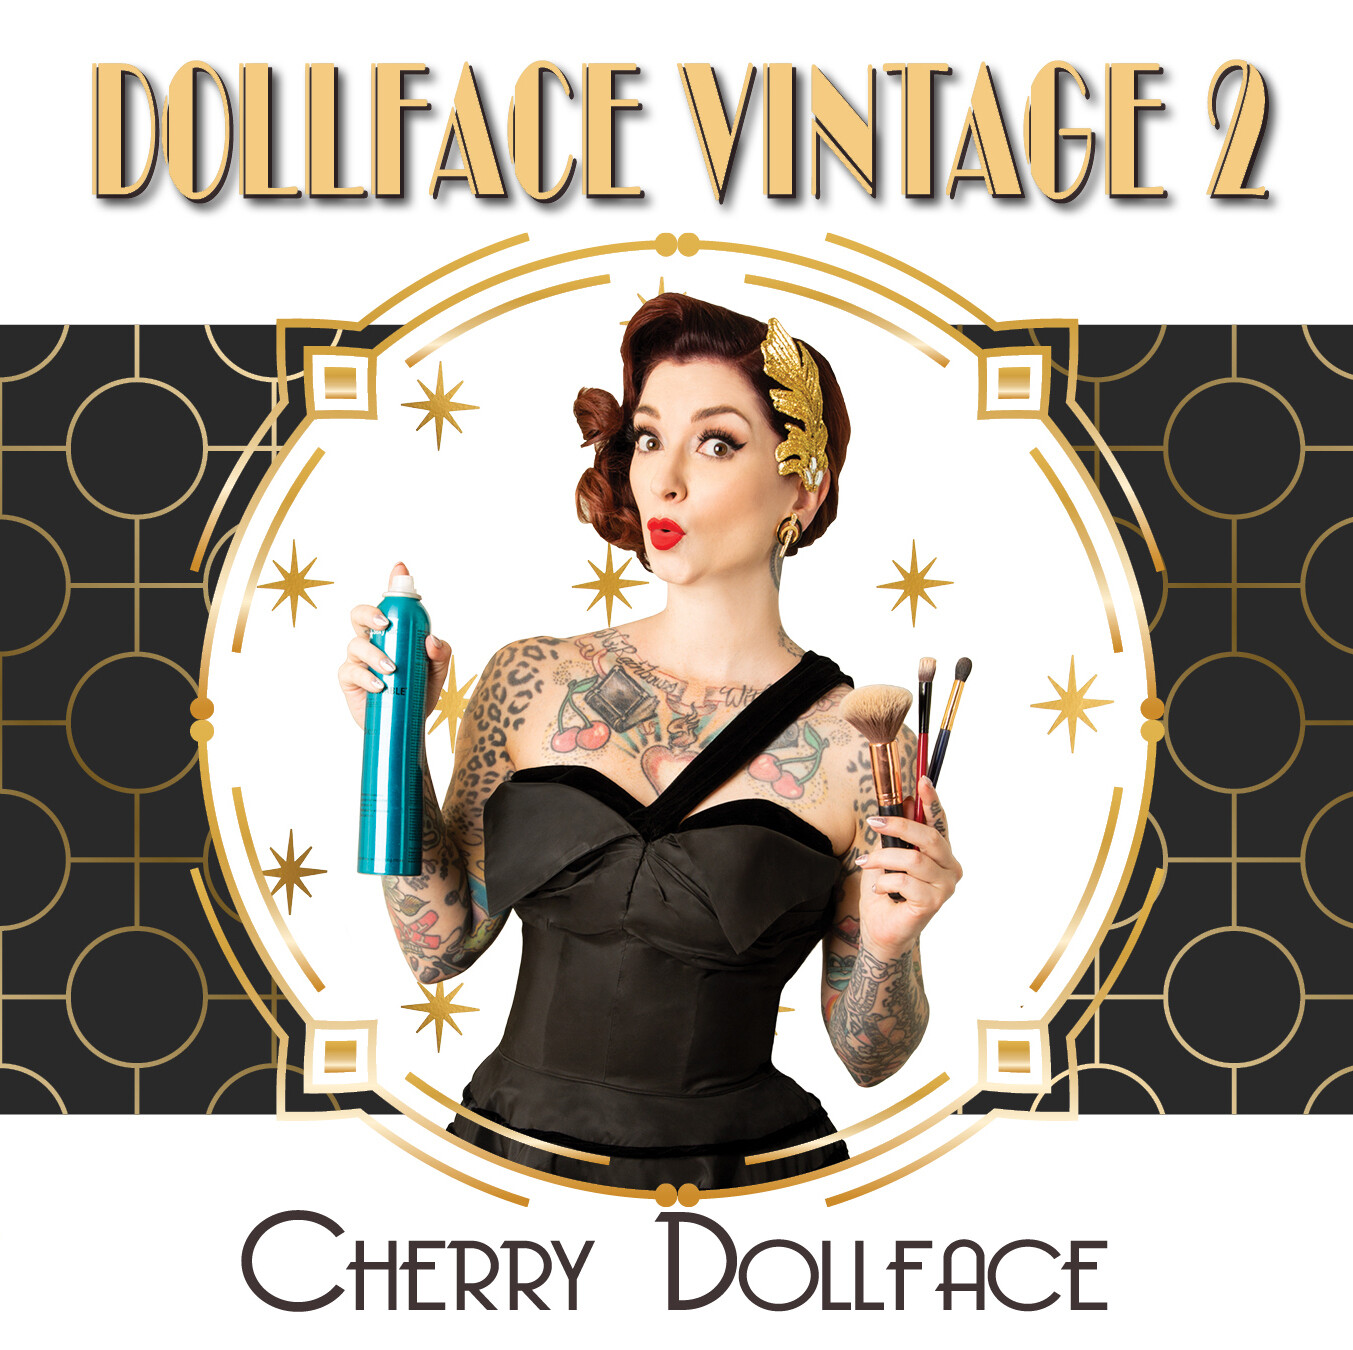 Dollface Vintage 2 by Cherry Dollface- PRE-ORDER